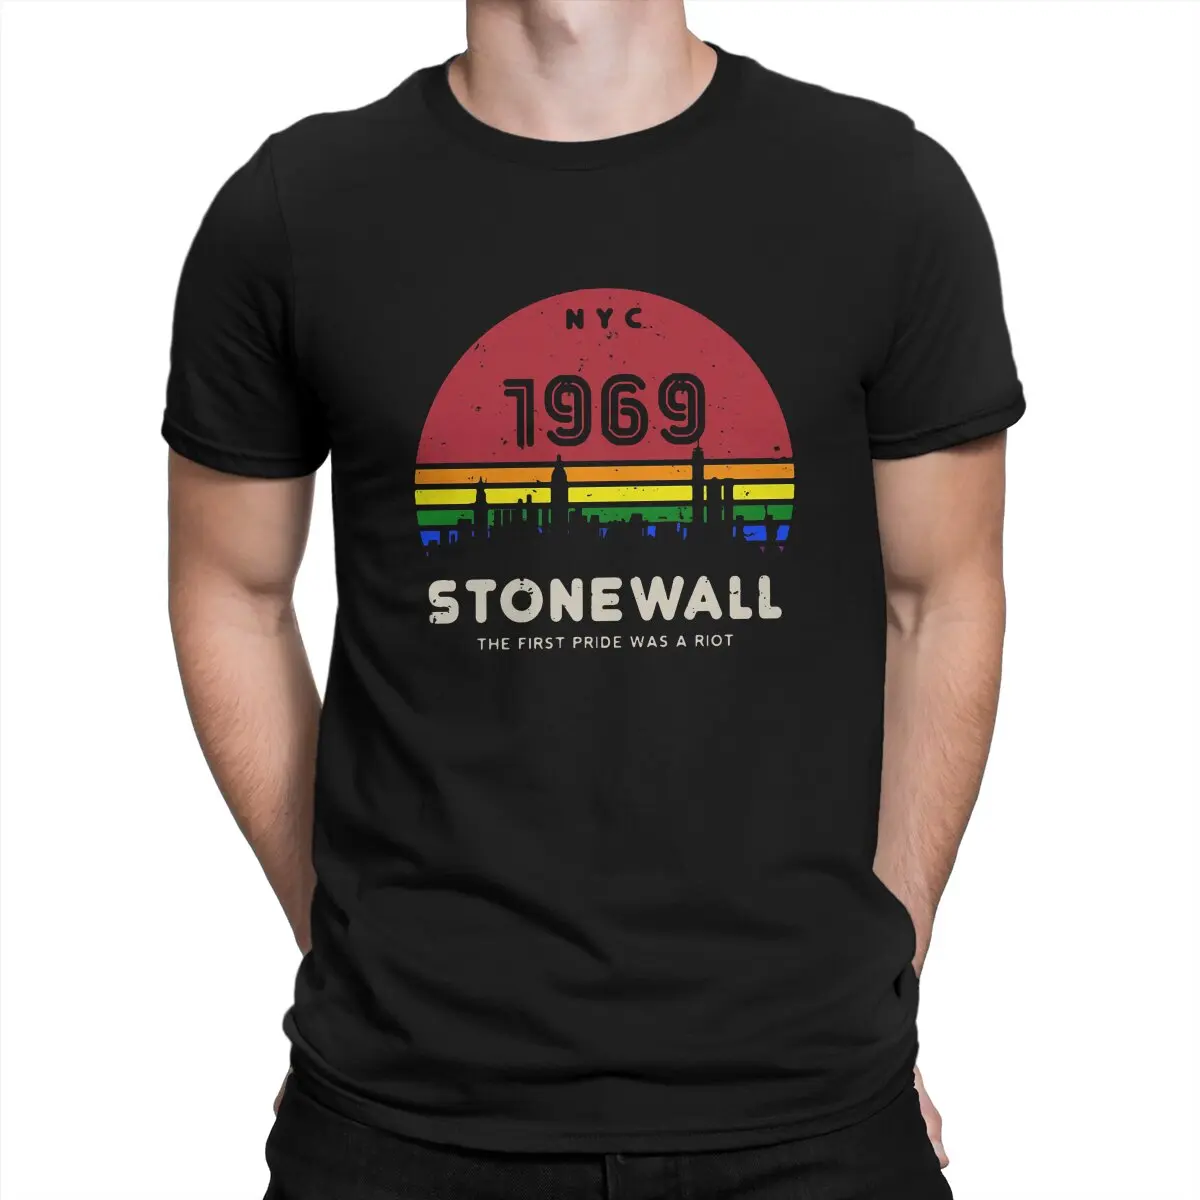 LGBTQ гей гордост TShirt 50th Anniversary Stonewall 1969 Was A Riot Basic Polyester T Shirt Leisure Men Clothes New Design Trendy